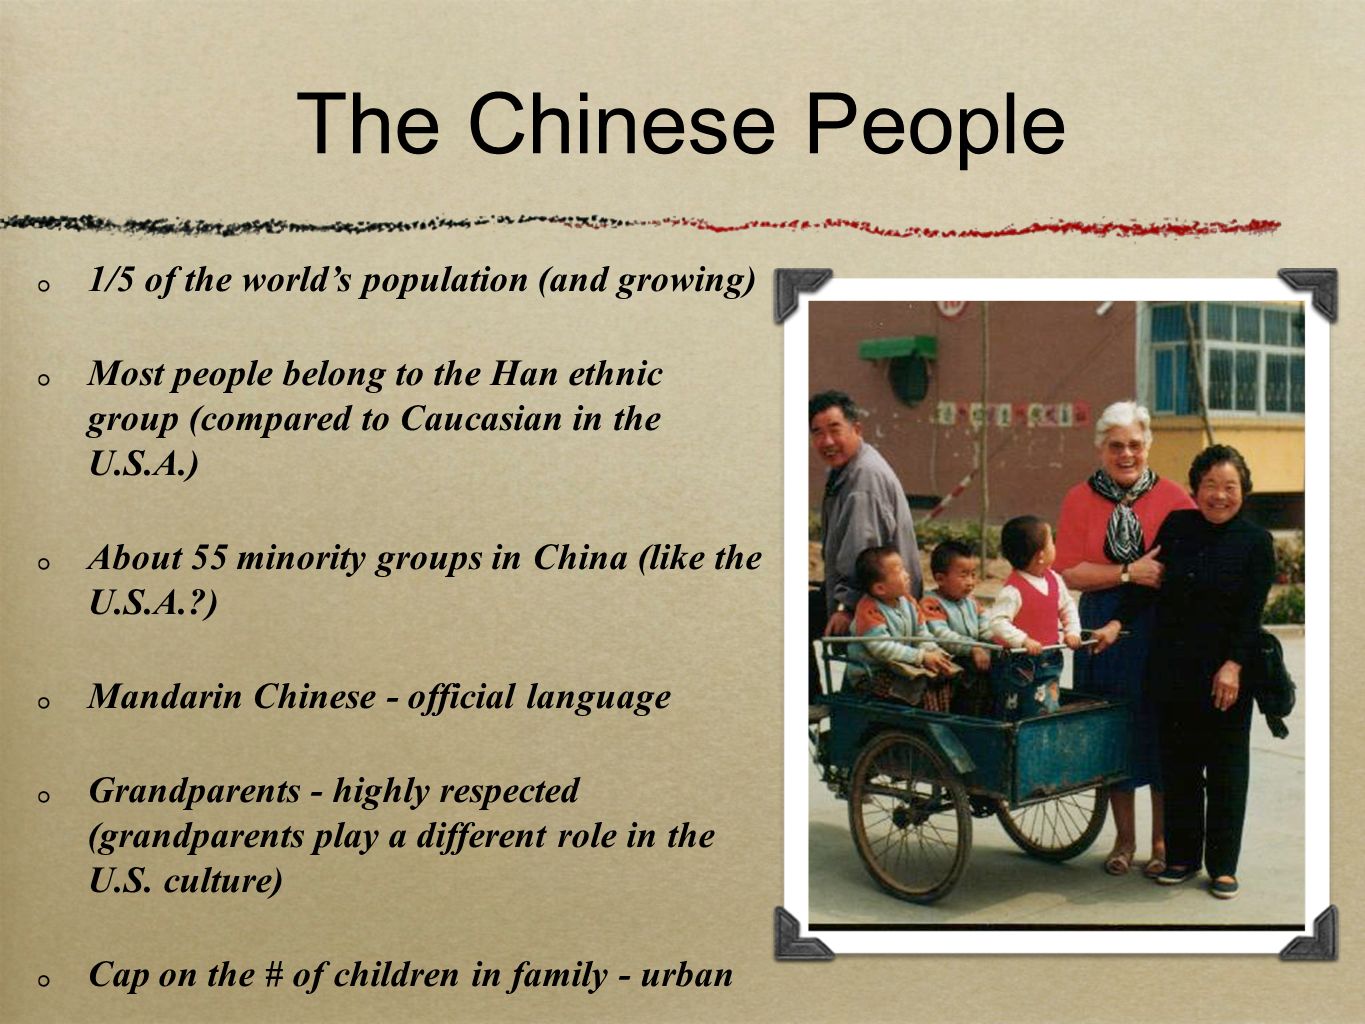 The Chinese People 1/5 of the world’s population (and growing) Most people belong to the Han ethnic group (compared to Caucasian in the U.S.A.) About 55 minority groups in China (like the U.S.A. ) Mandarin Chinese - official language Grandparents - highly respected (grandparents play a different role in the U.S.